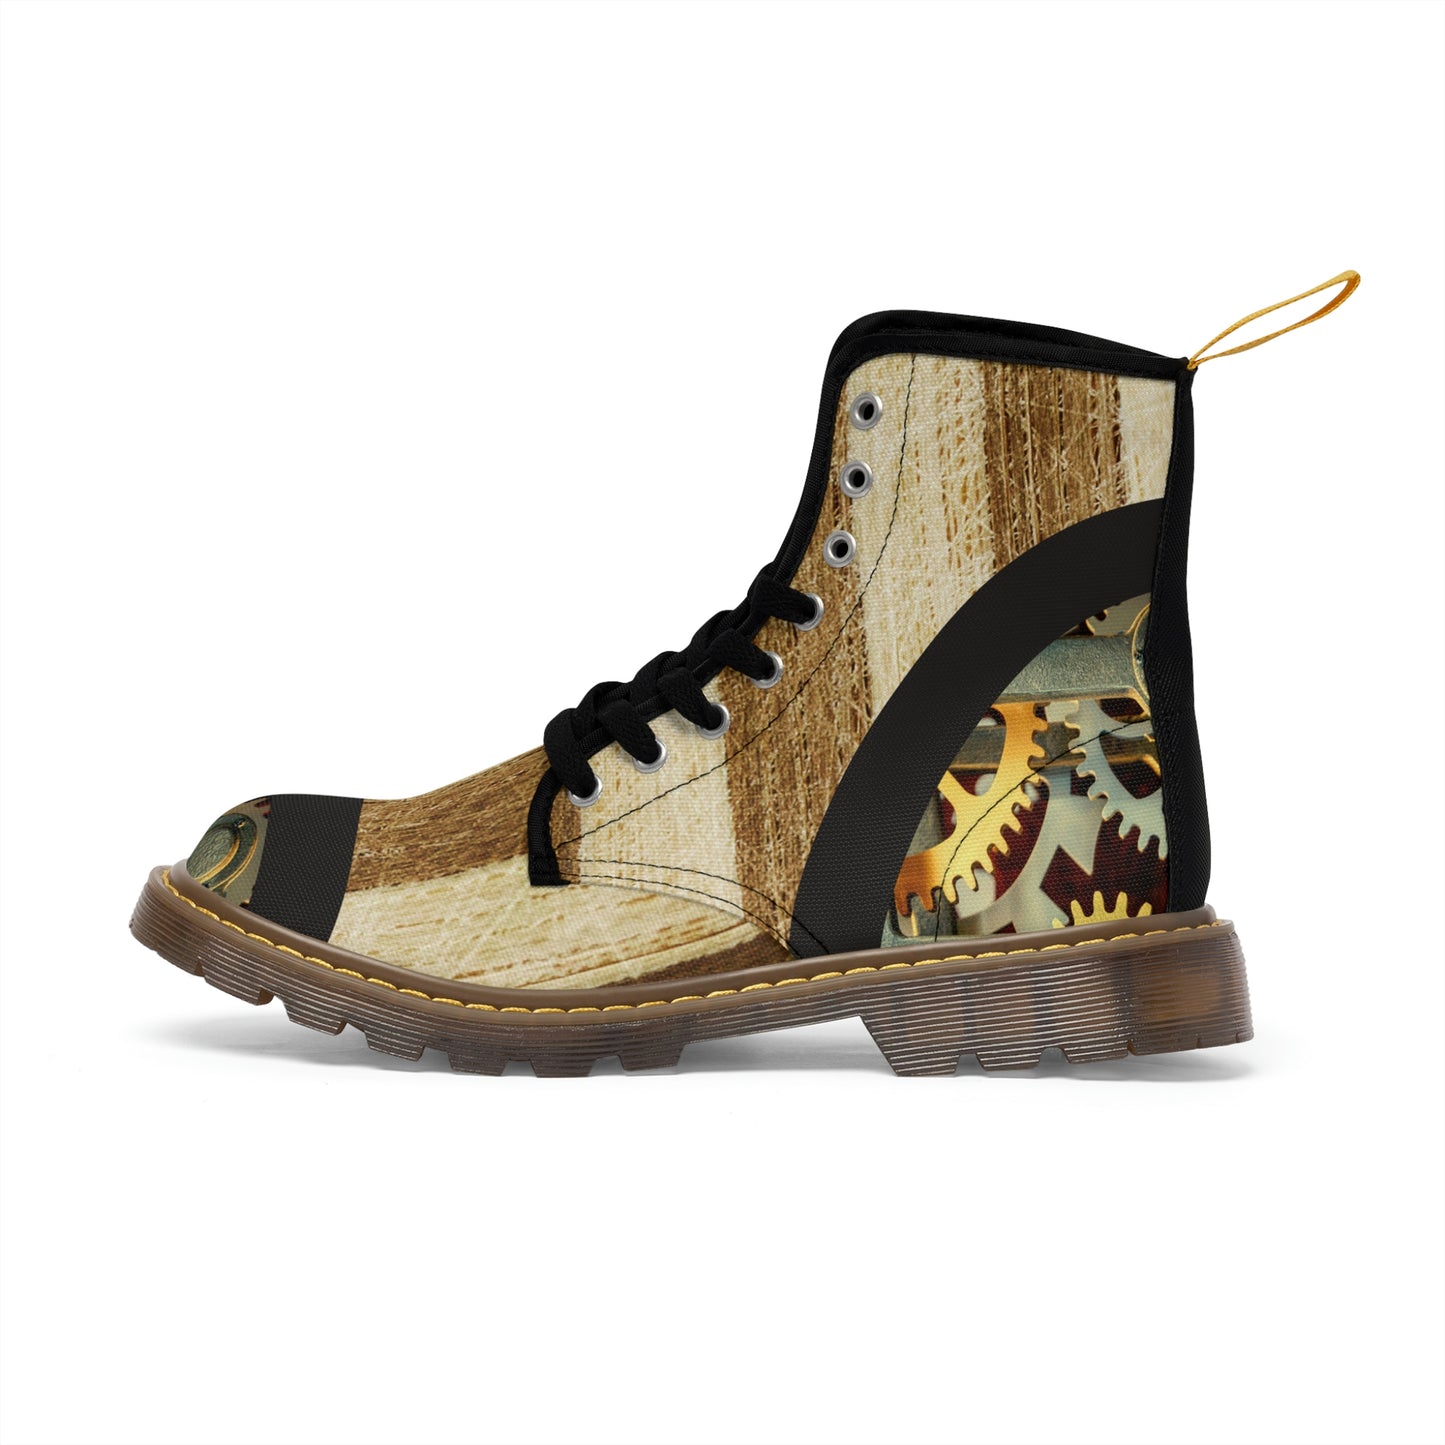 Women's Steampunk Gear Canvas Boots Lord and Lady Towers